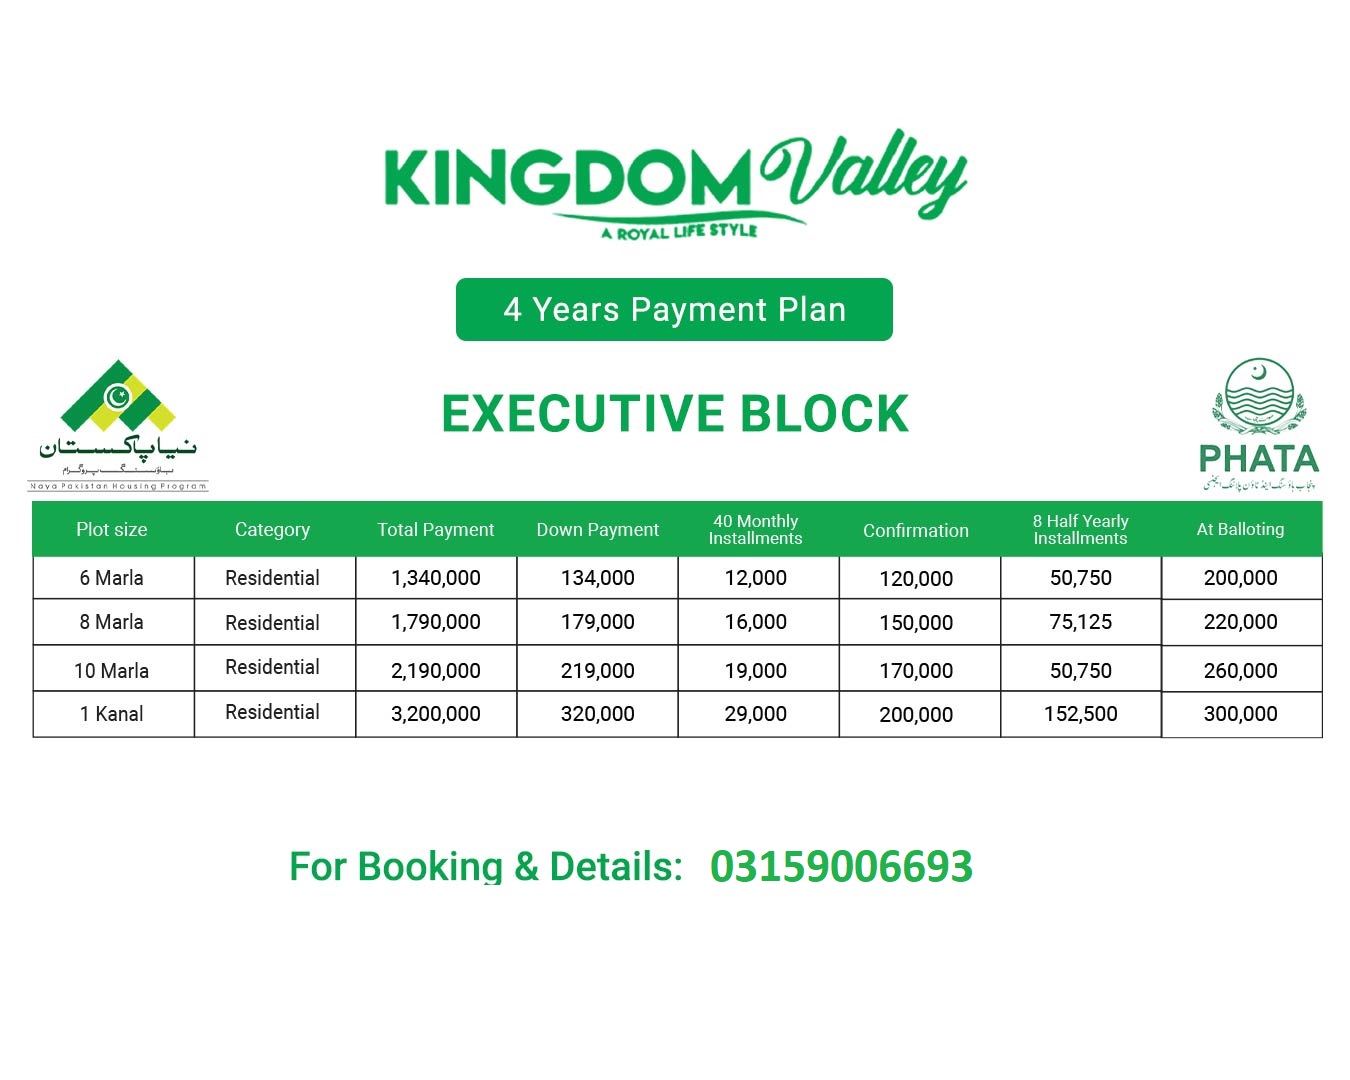 RDA approved kingdom valley payment plan